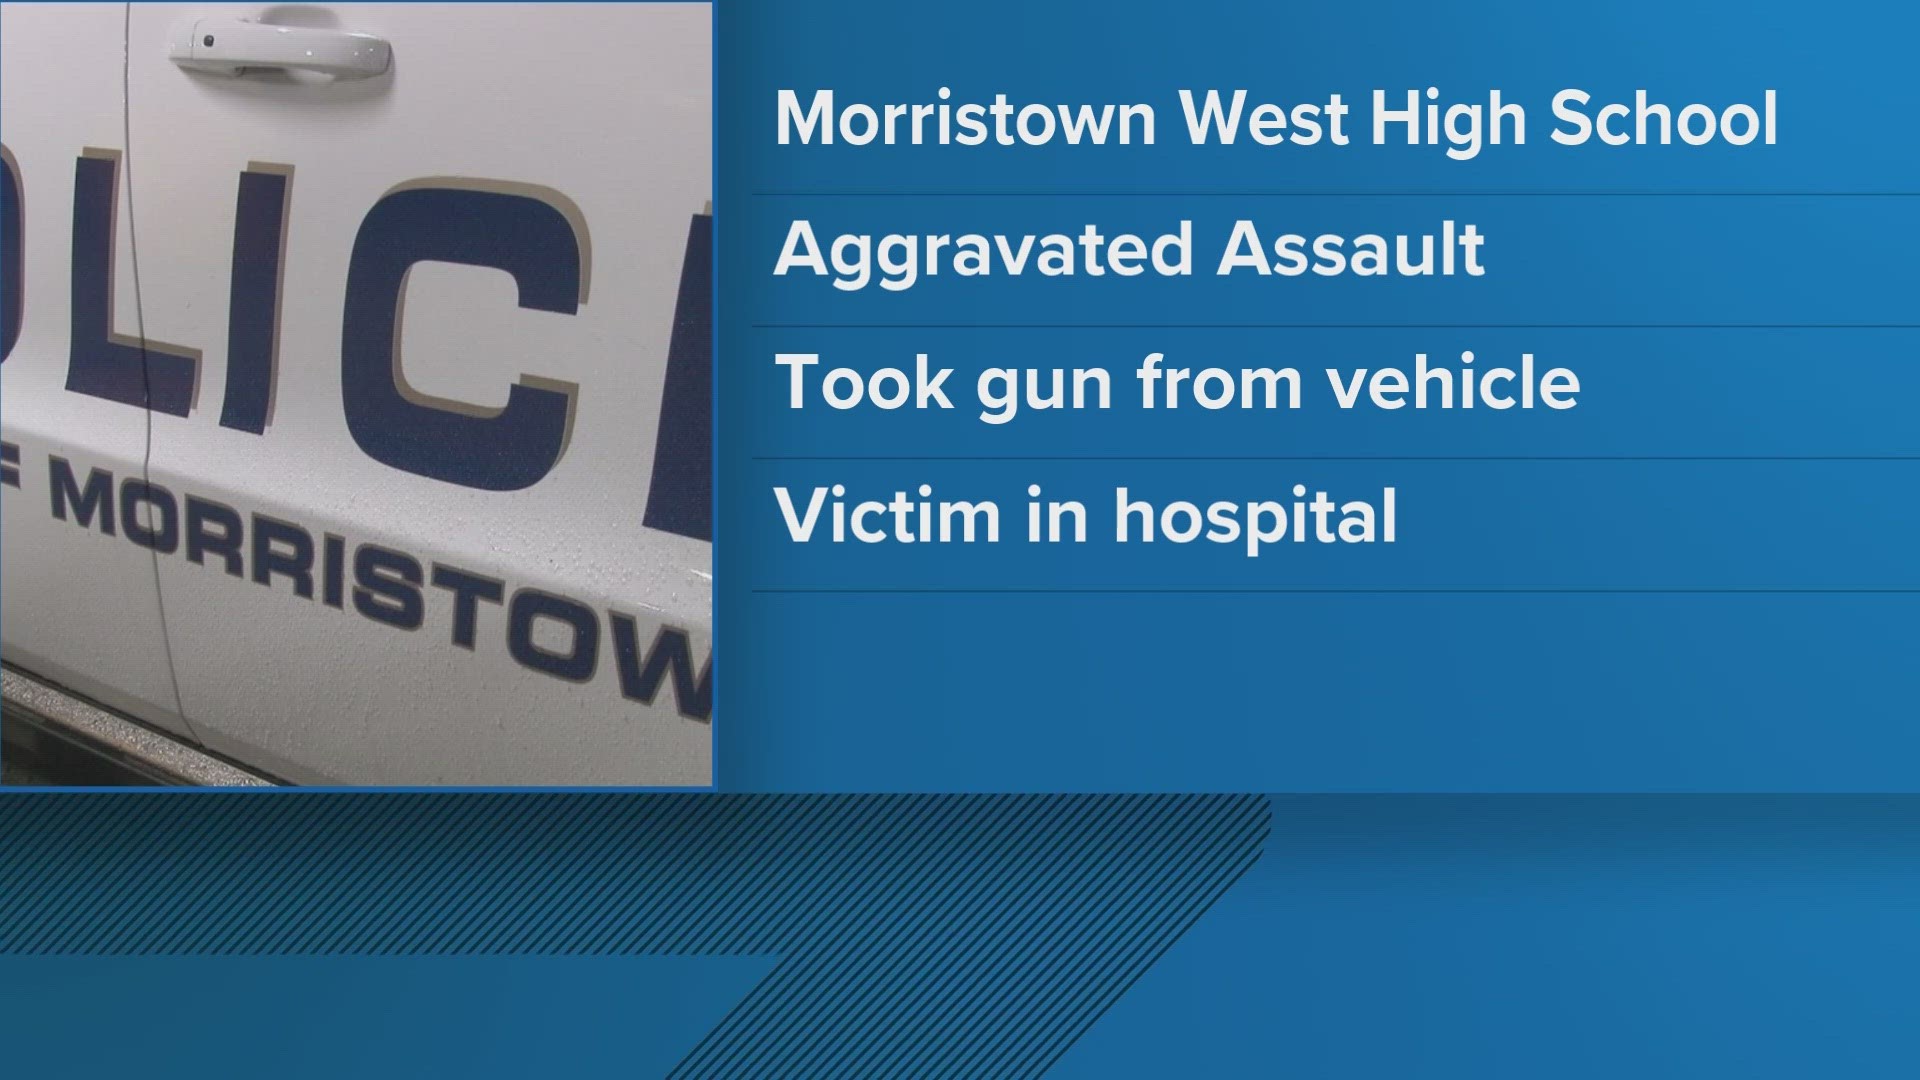 It happened Tuesday afternoon on Sulphur Springs Road at an apartment across the street from Morristown West High School.